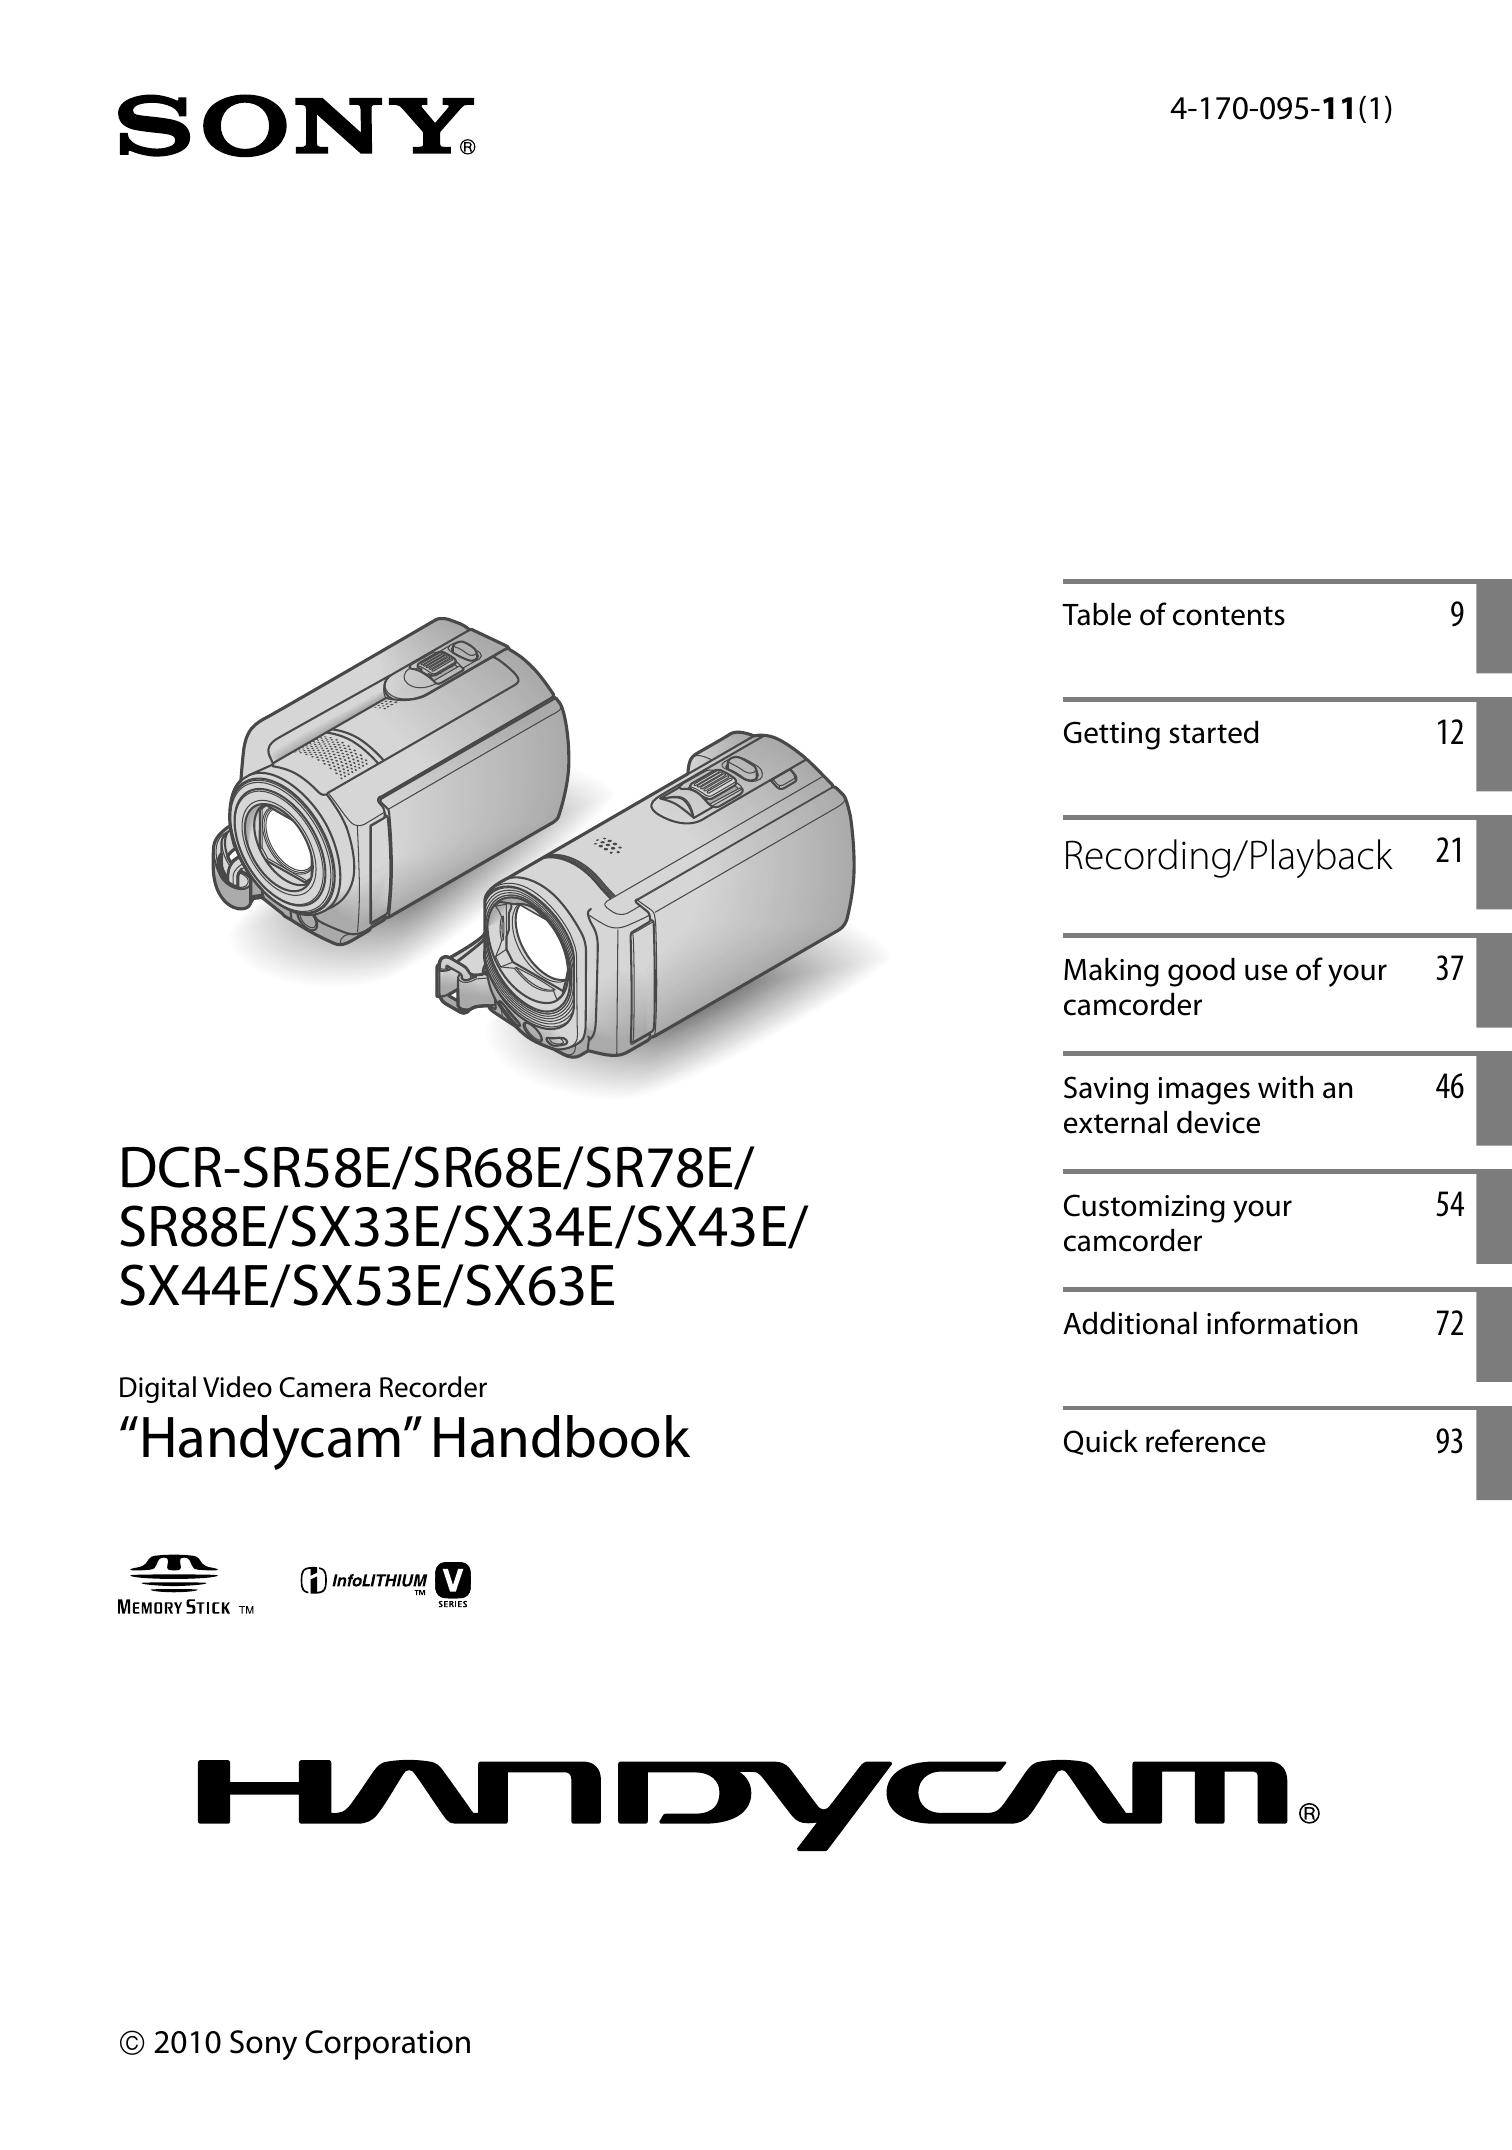 Sony 4-170-095-11(1) Camcorder User Manual